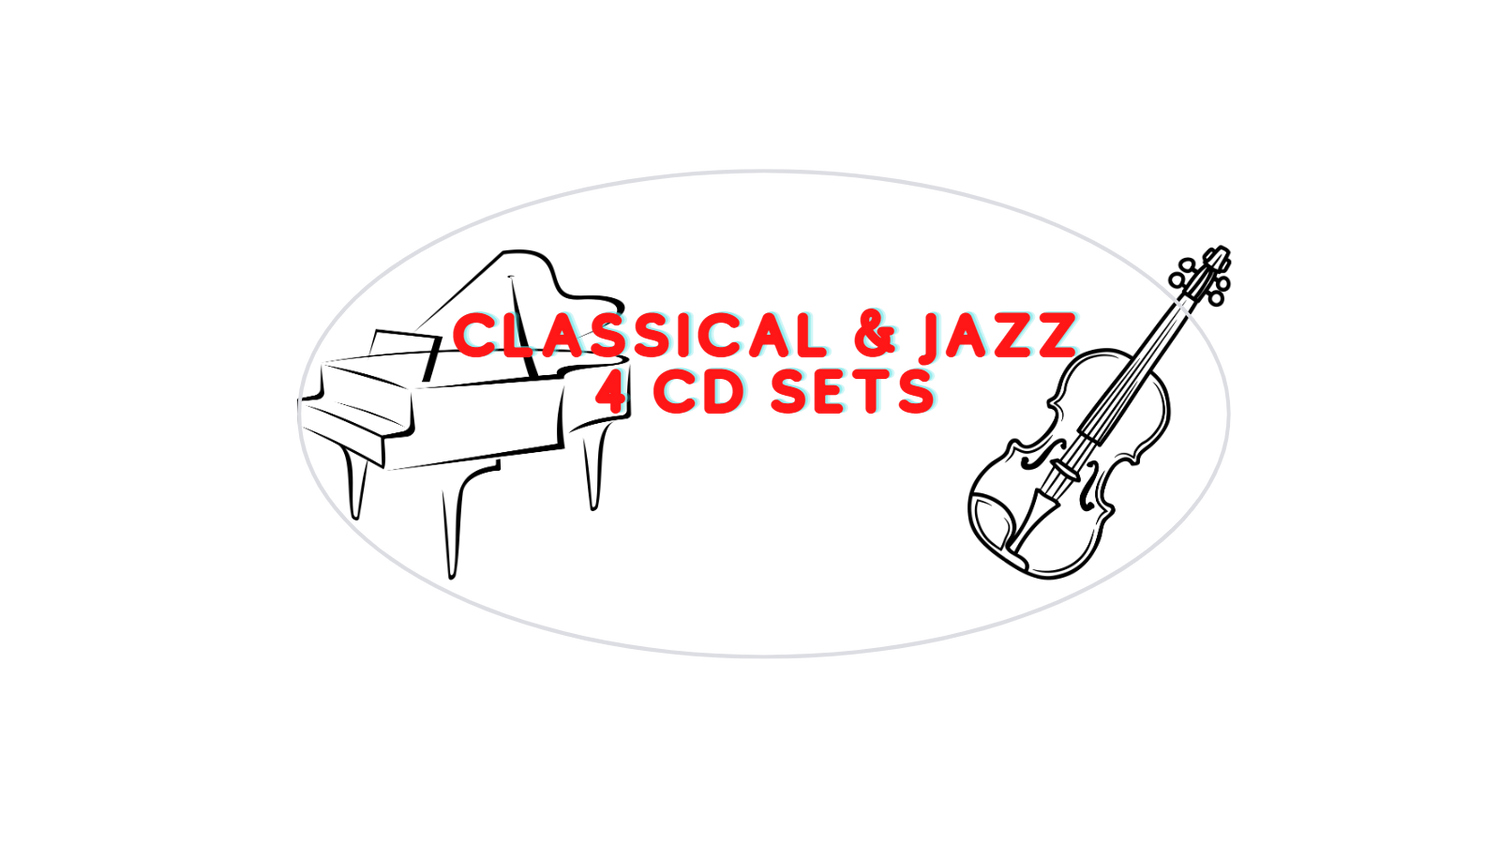 CLASSICAL AND JAZZ 4 CD SETS